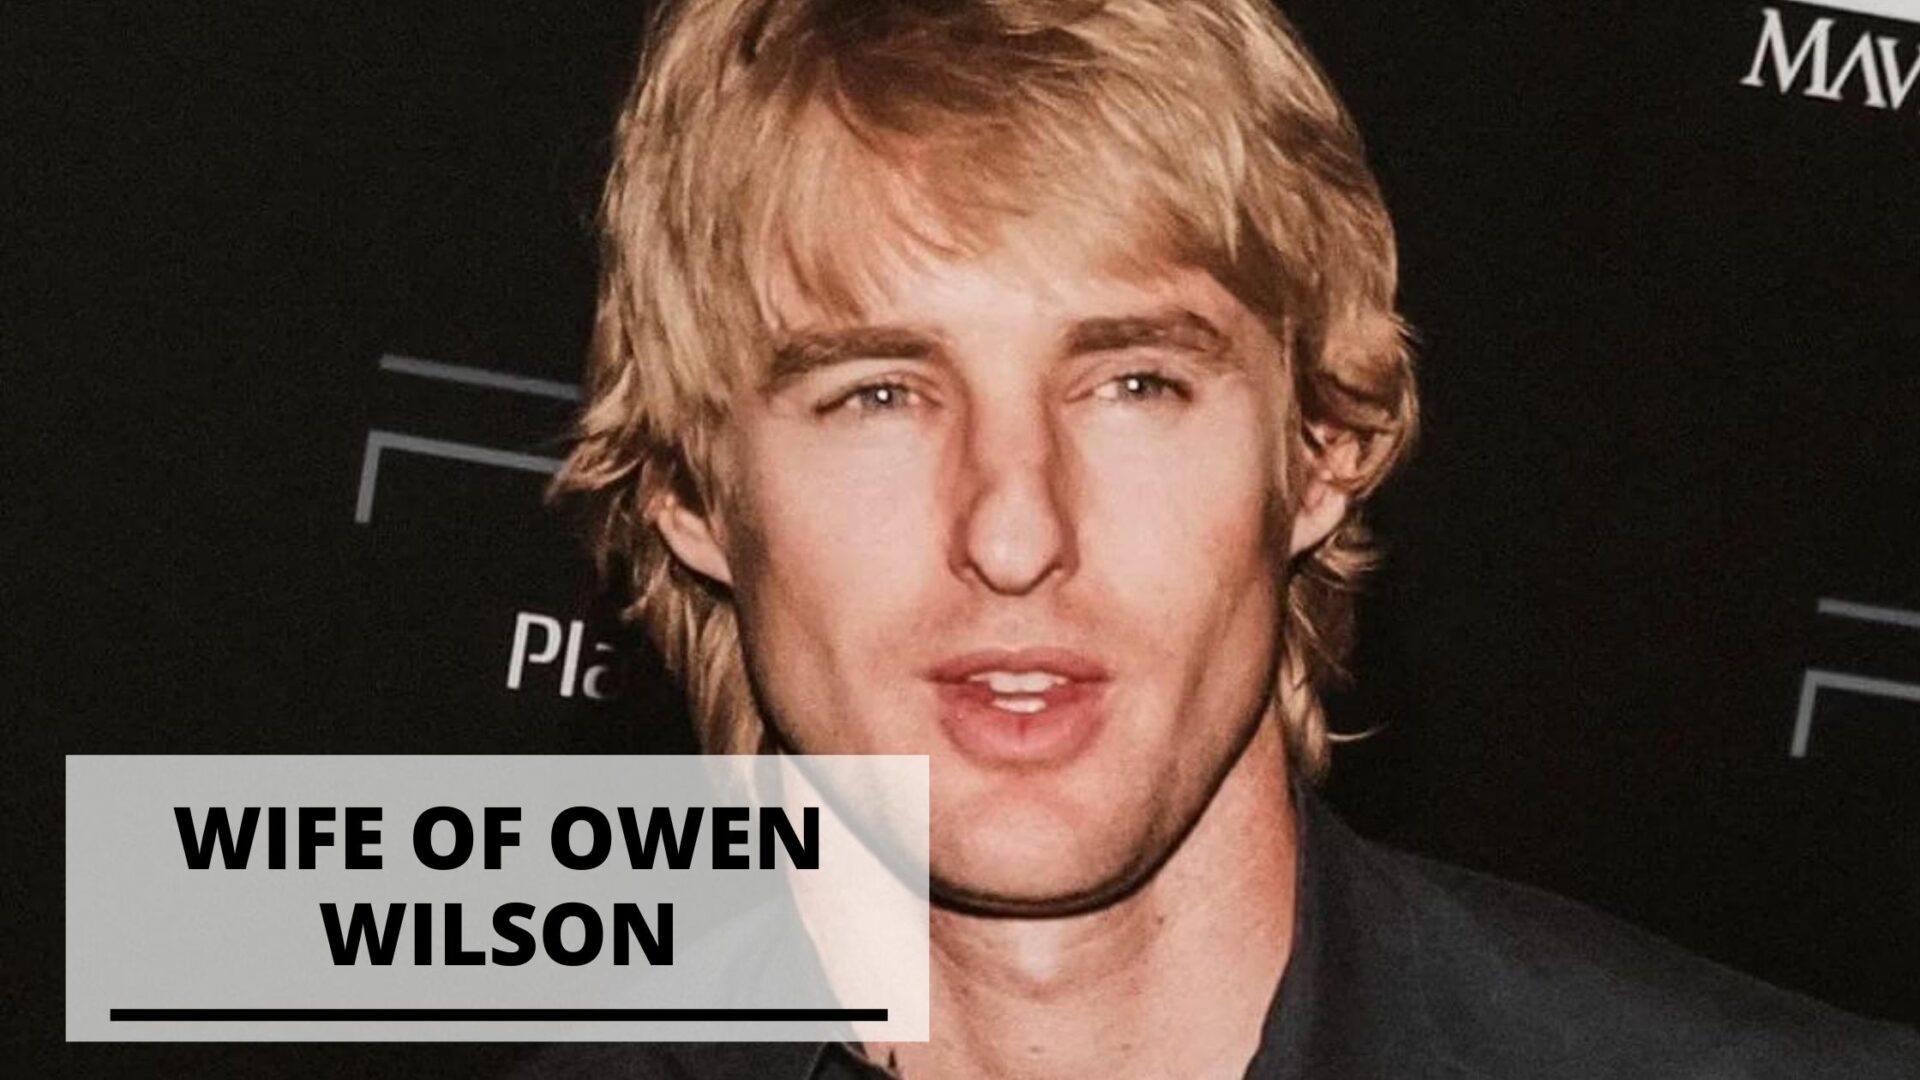 Who is the Wife of Owen Wilson?